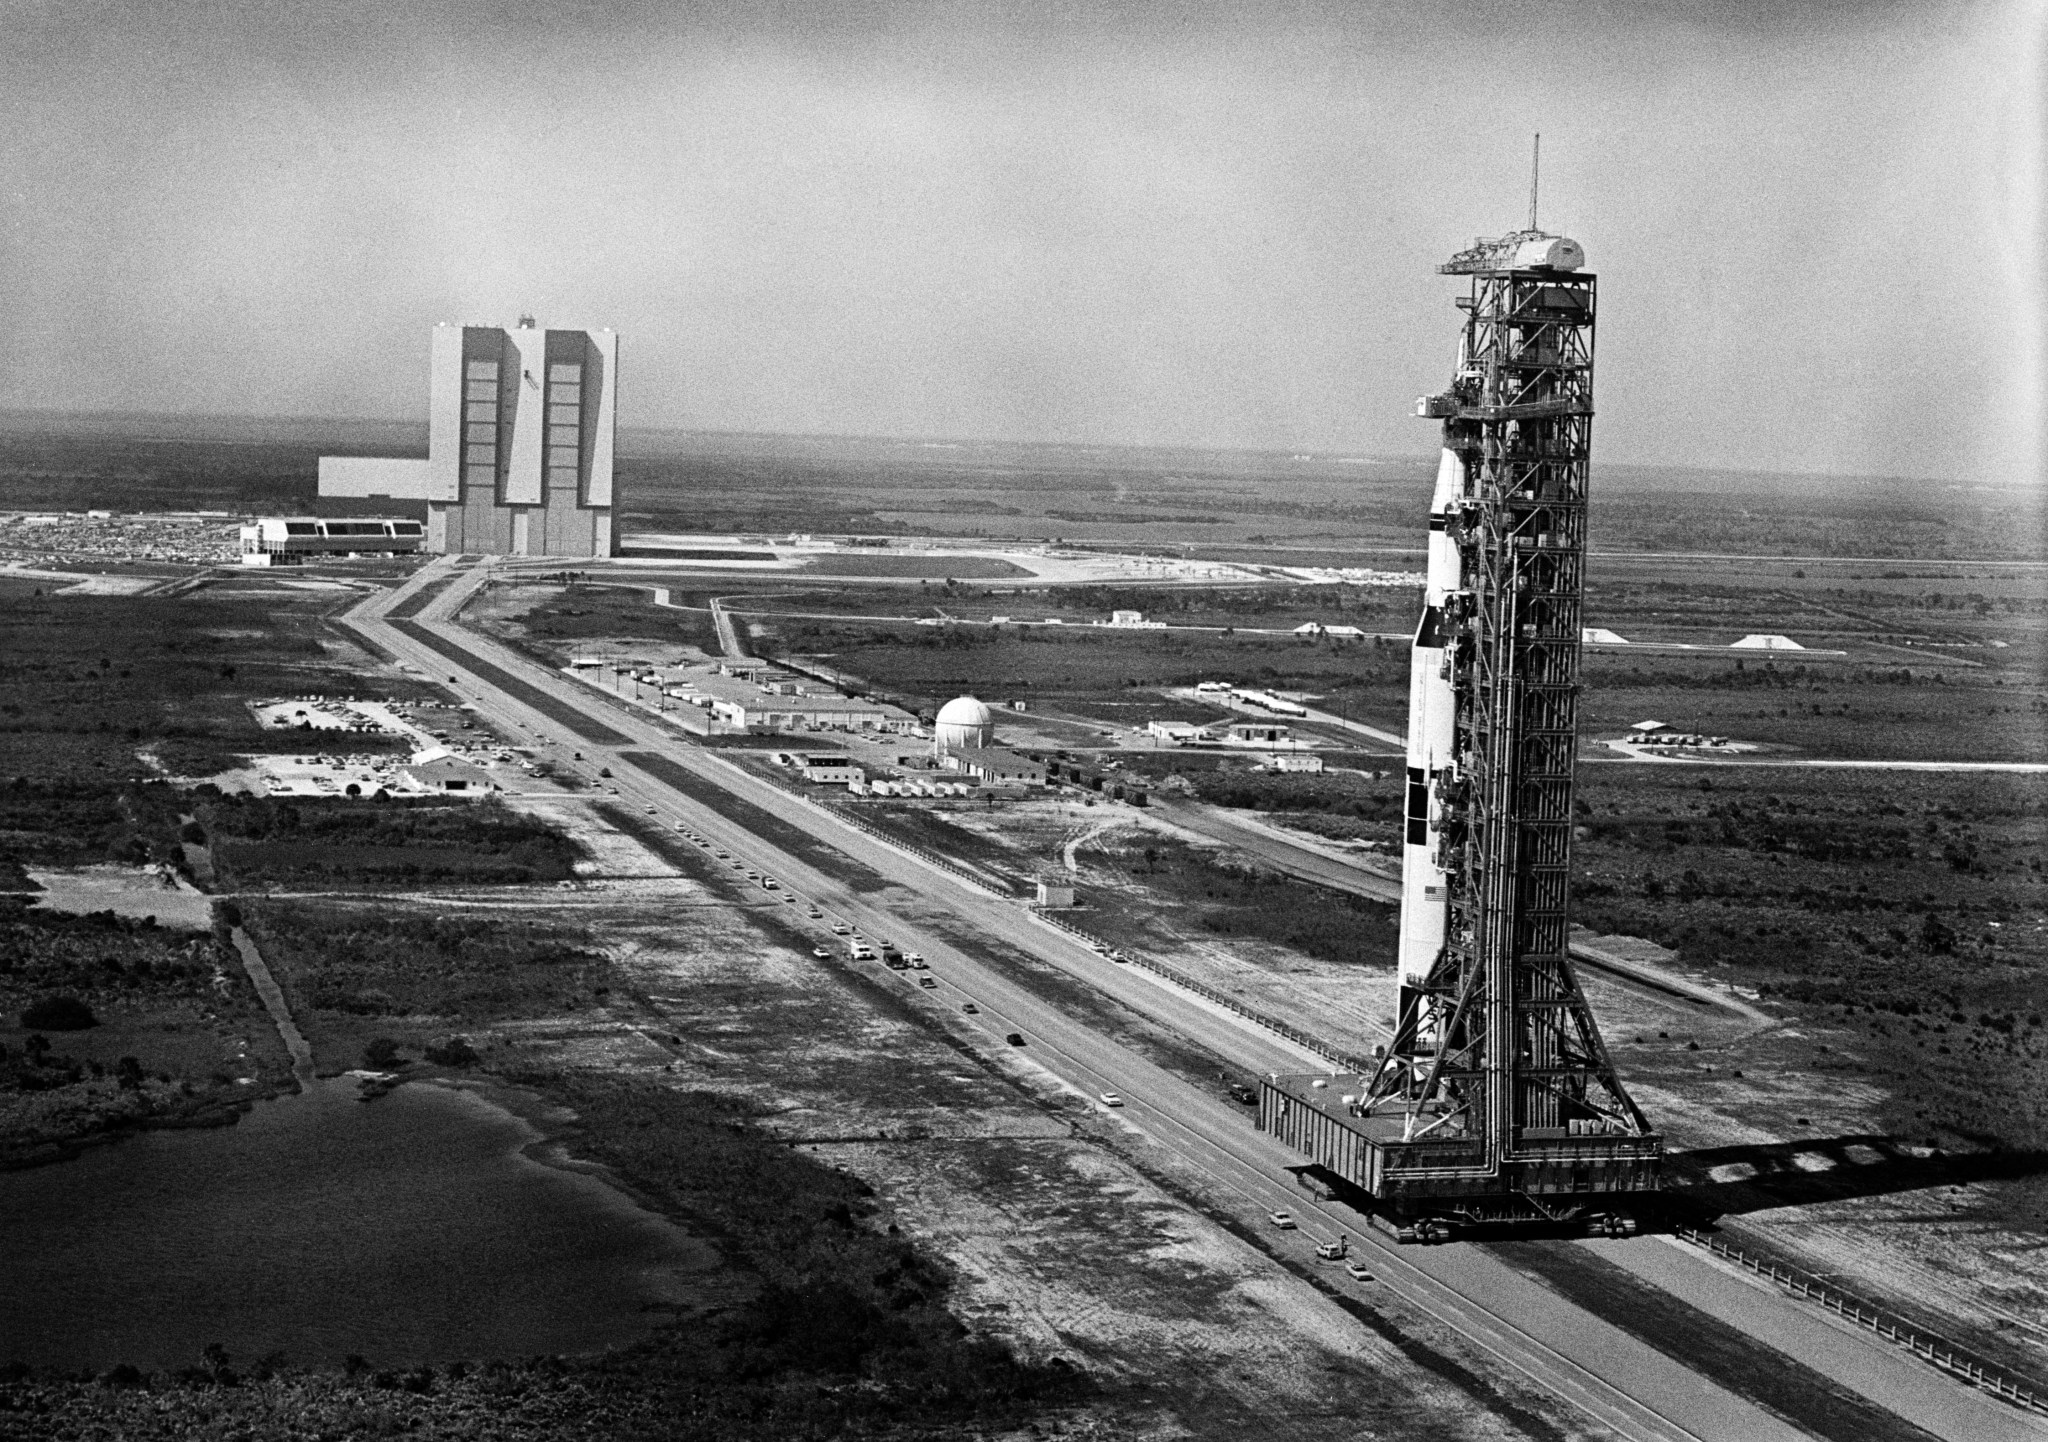 This week in 1969, Apollo 10 launched from NASA’s Kennedy Space Center. 